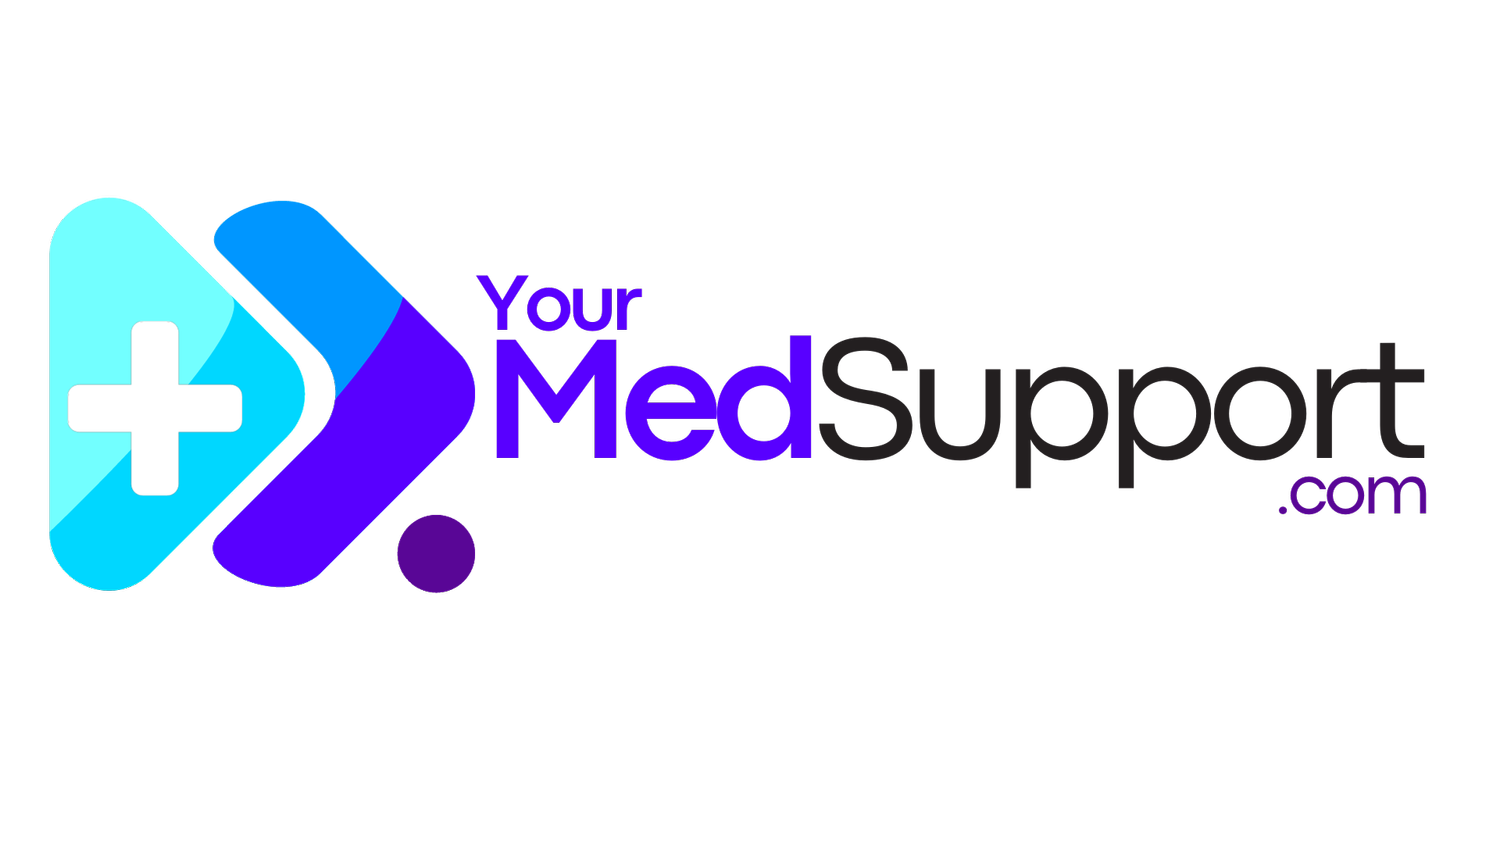 Your Med Support